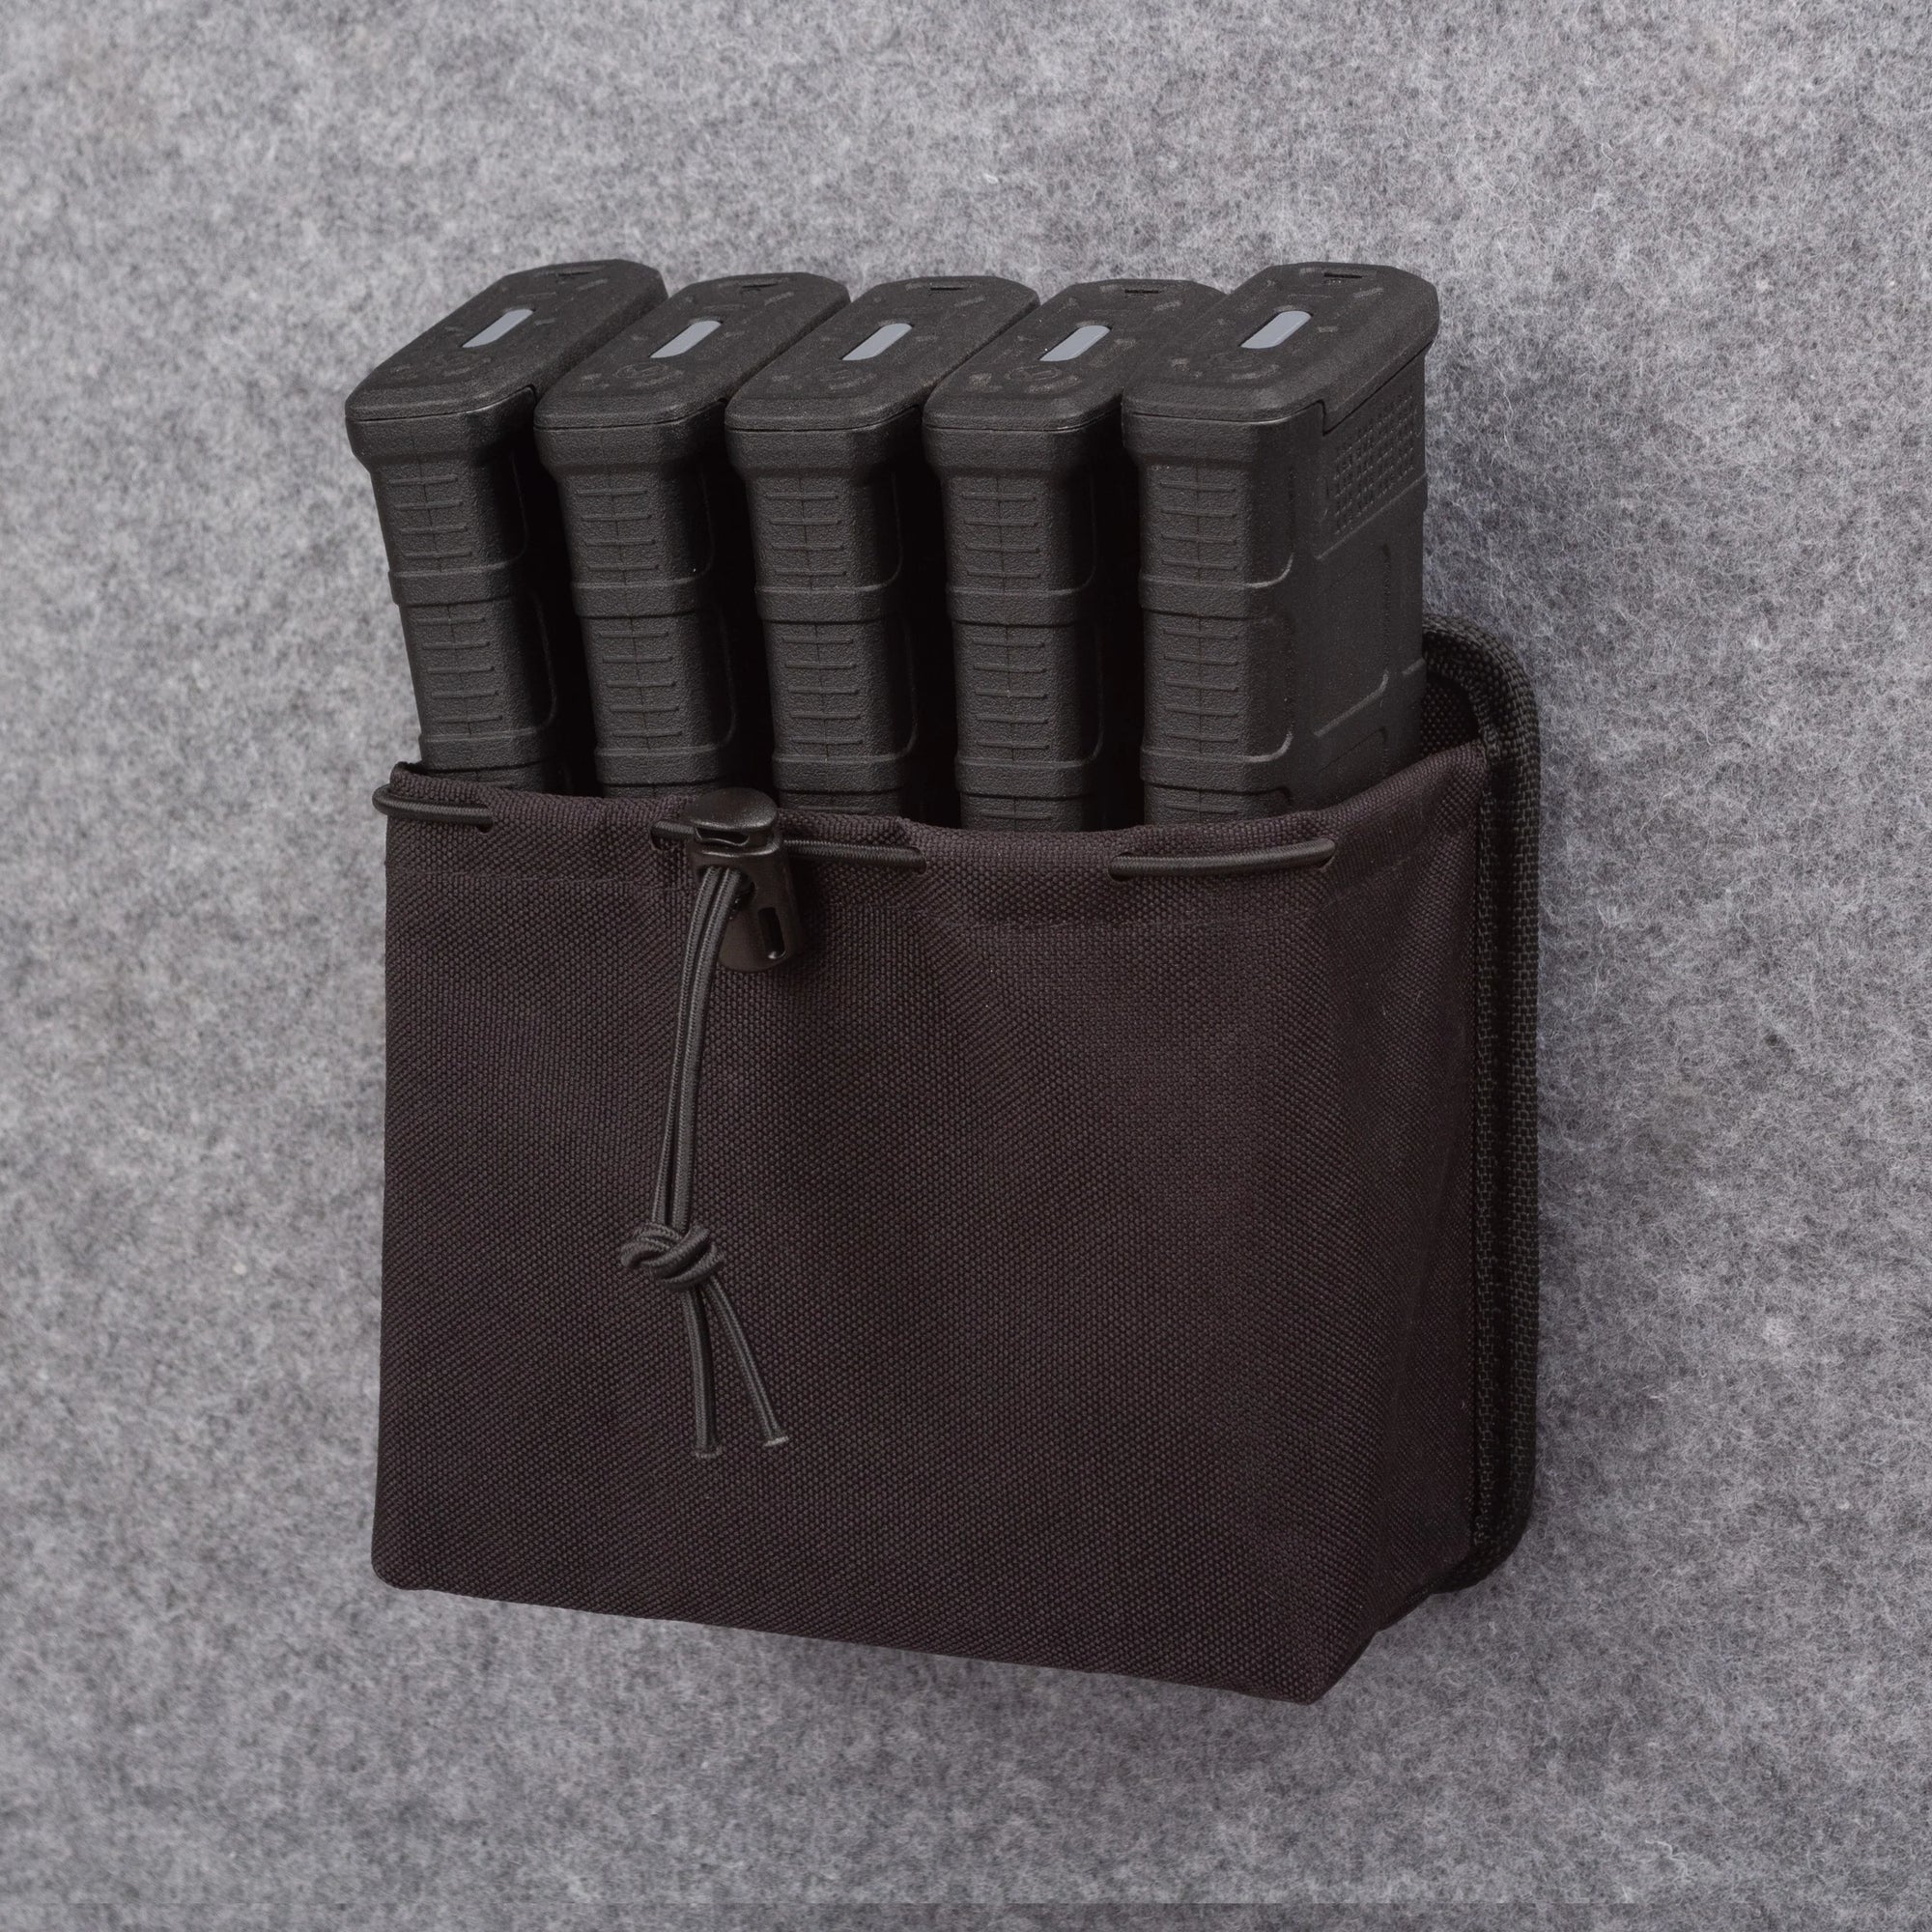 Tracker PG563 General Pocket with AR Mags